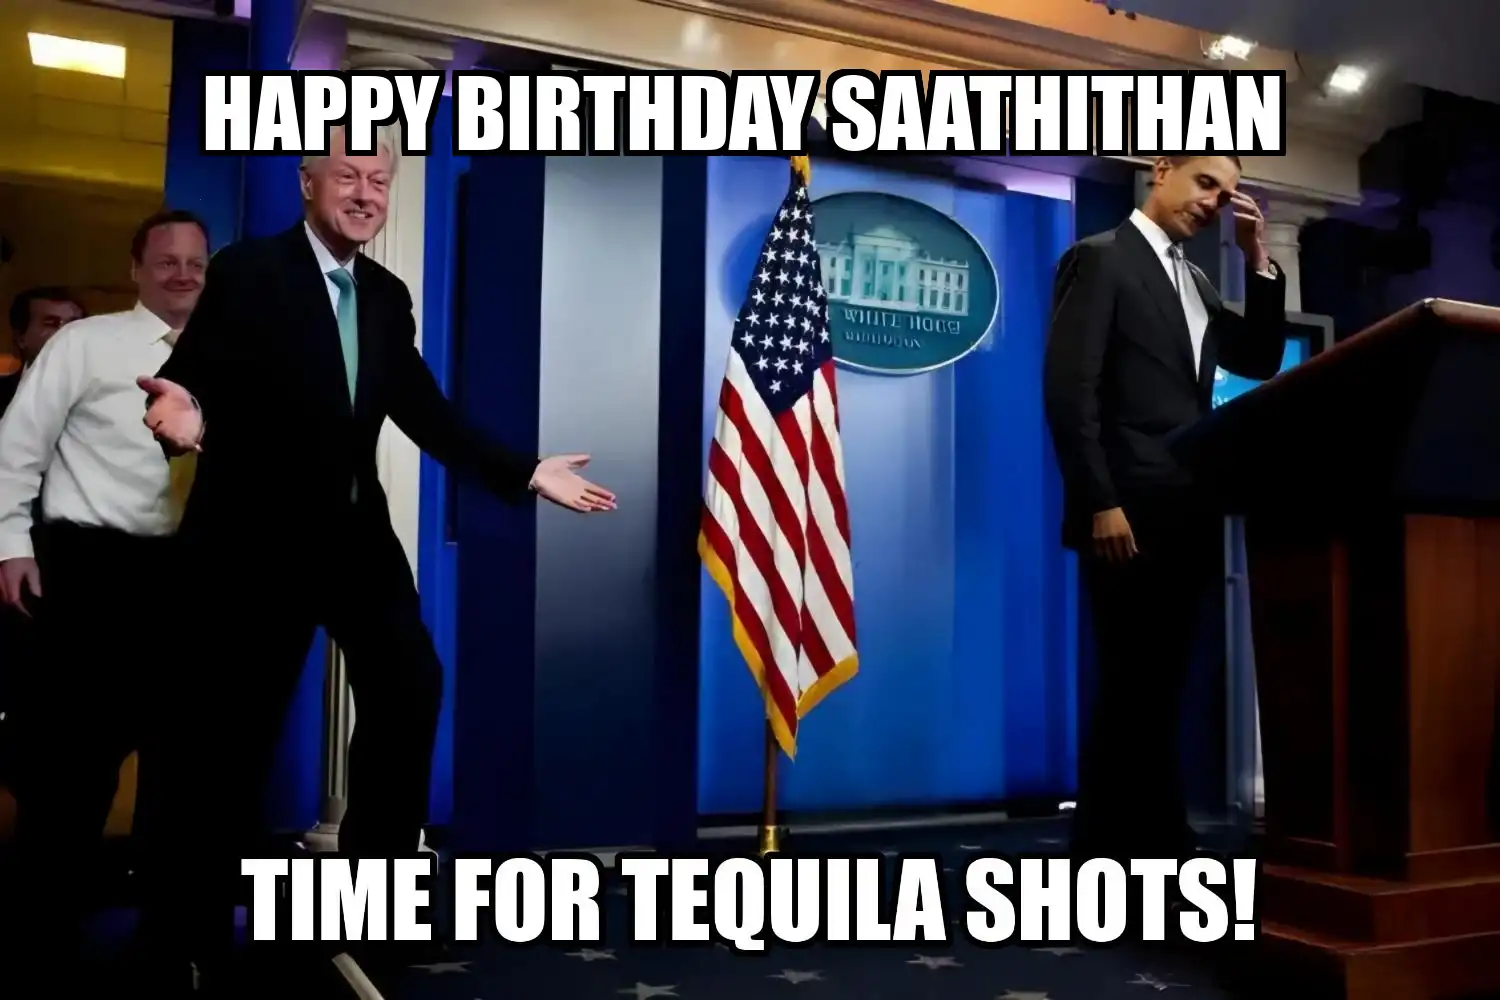 Happy Birthday Saathithan Time For Tequila Shots Memes